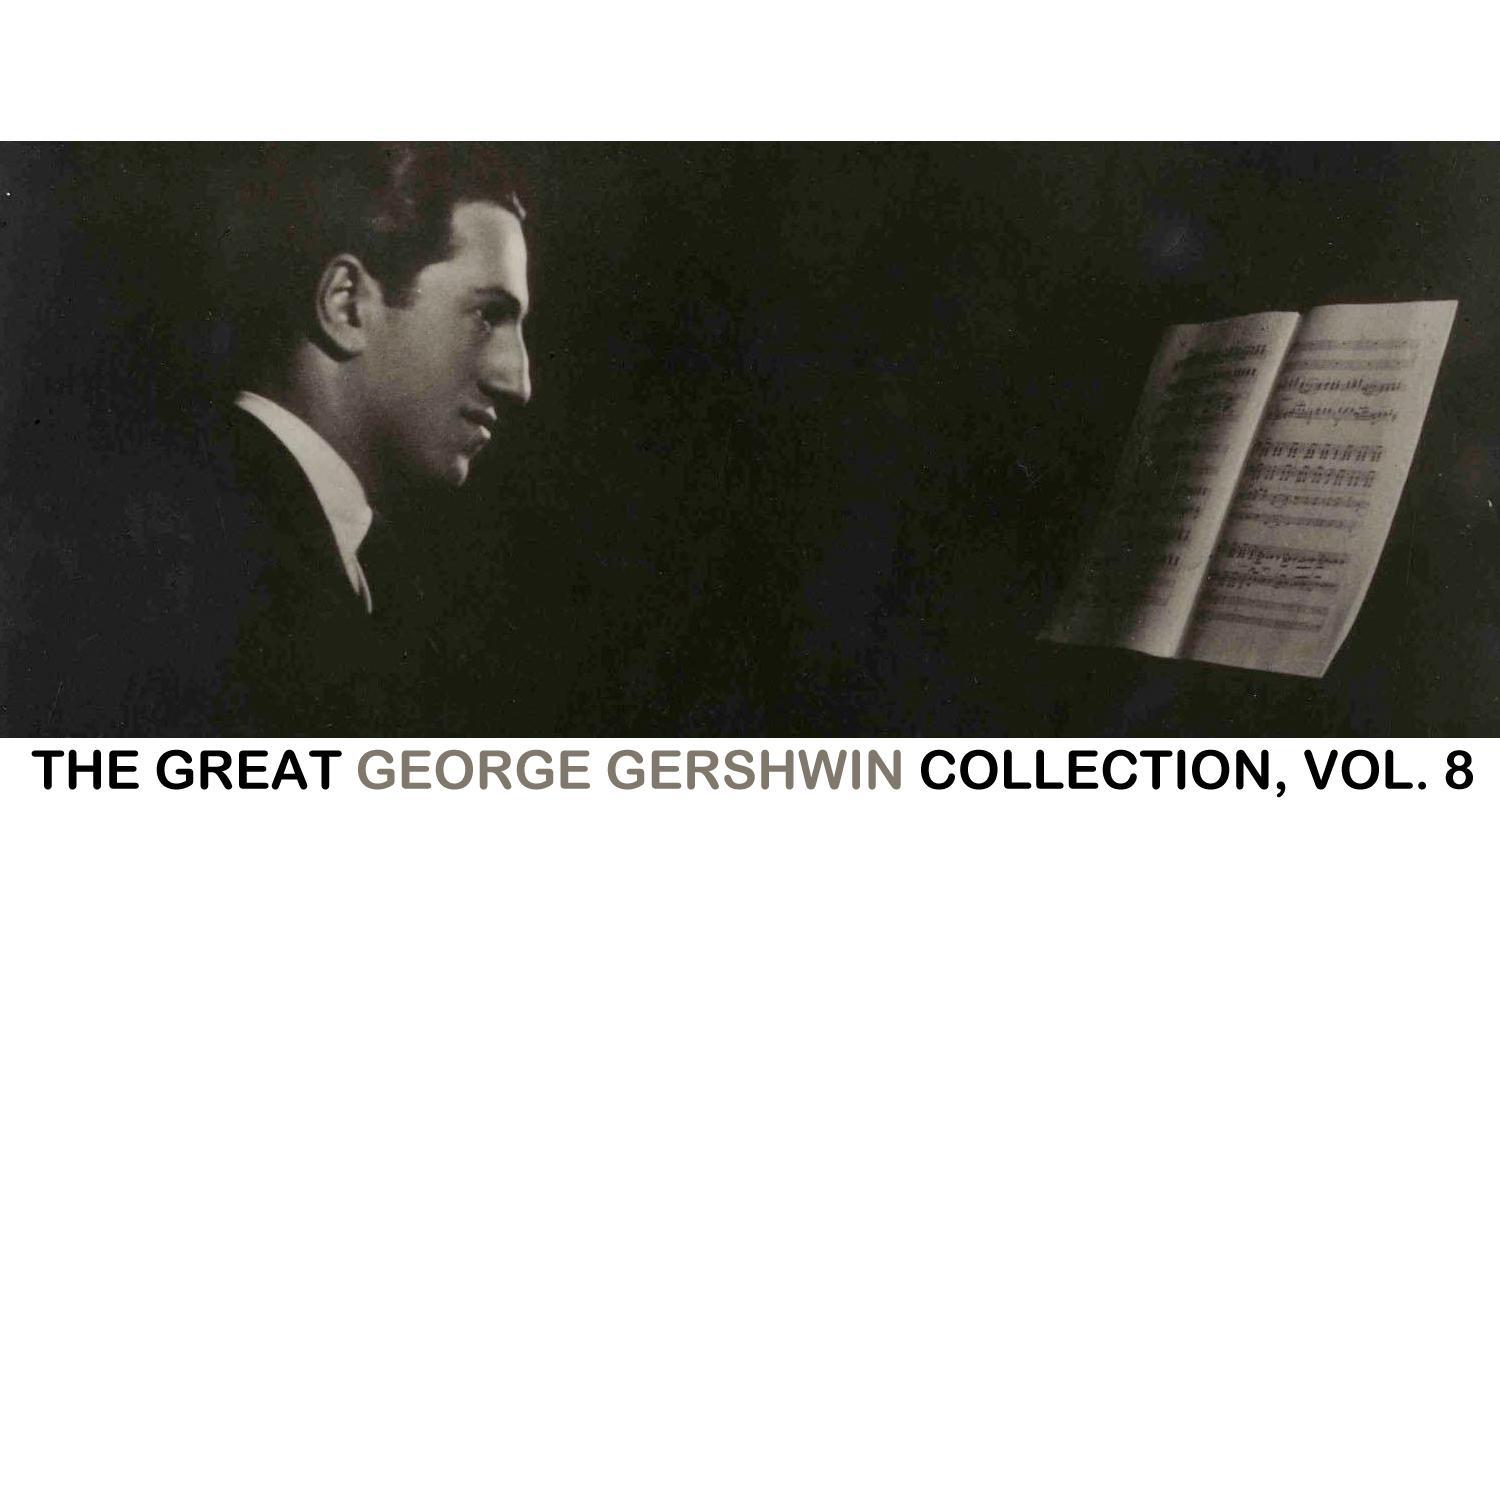 The Great George Gershwin Collection, Vol. 8